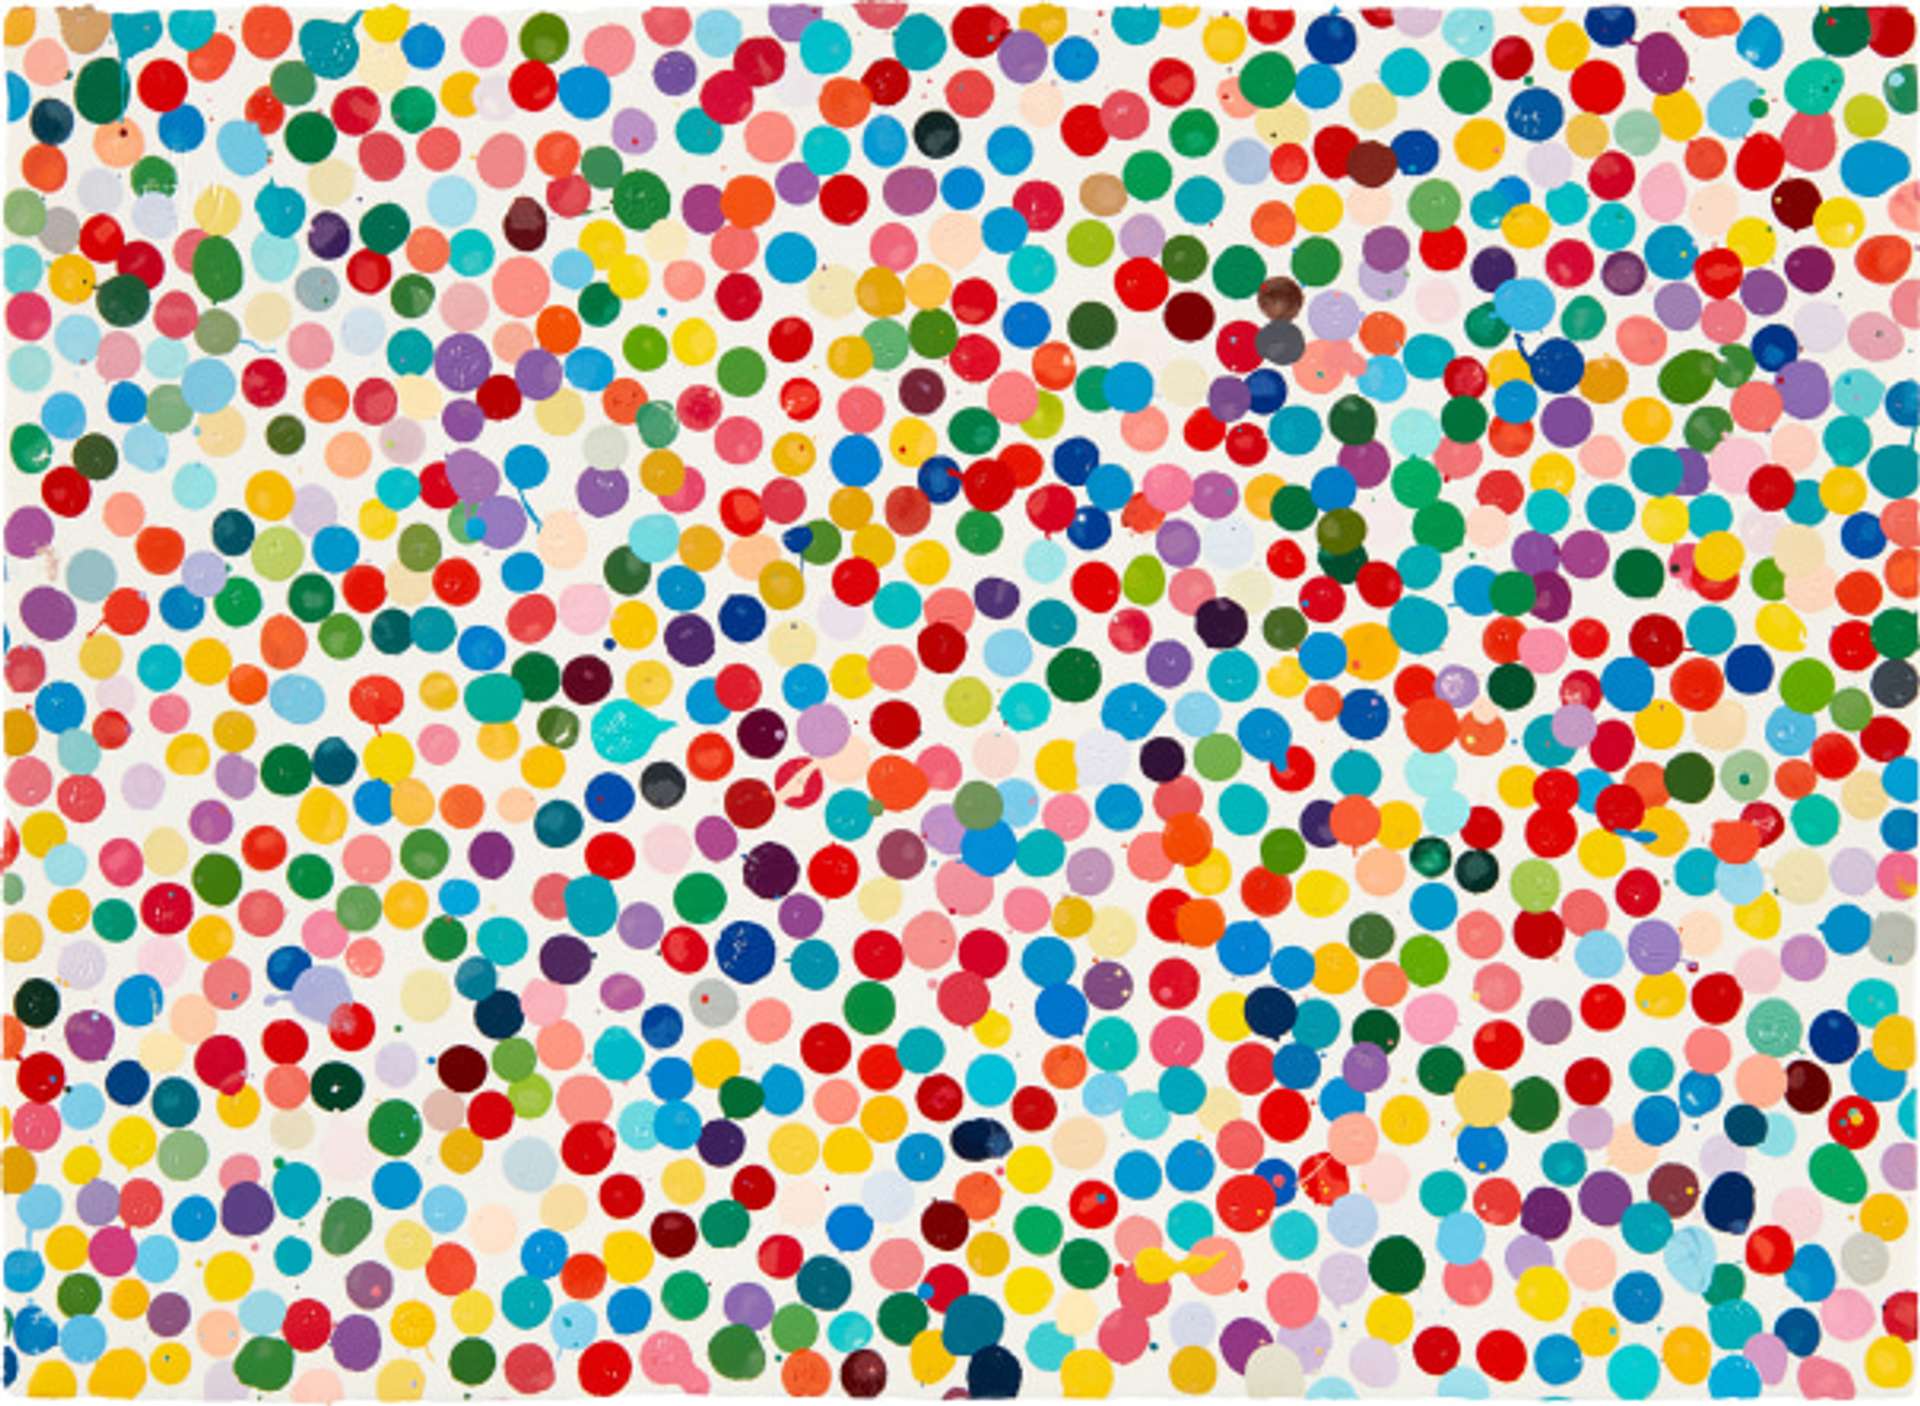 Multicoloured dots against a white paper background.